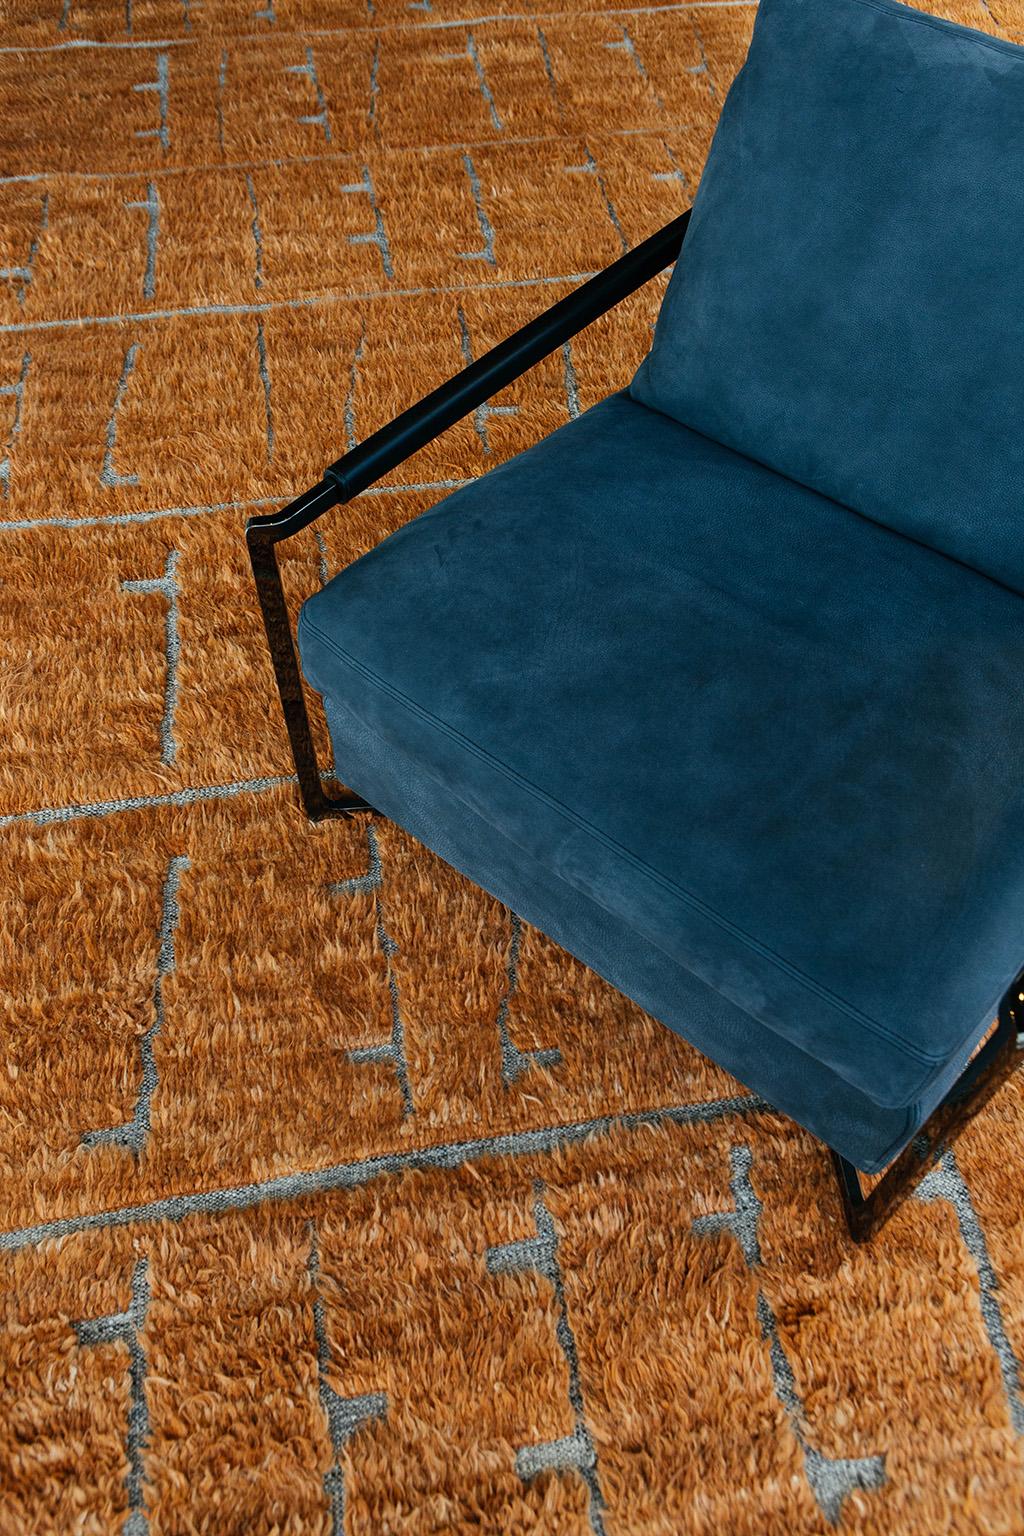 Sumatra's design is noted for its imagery that is embossed into our signature orange shag. Intuitive motifs repeat and create a unique and eye-catching rug that will bring personality to any space. Mehraban's Haute Bohemian collection is the